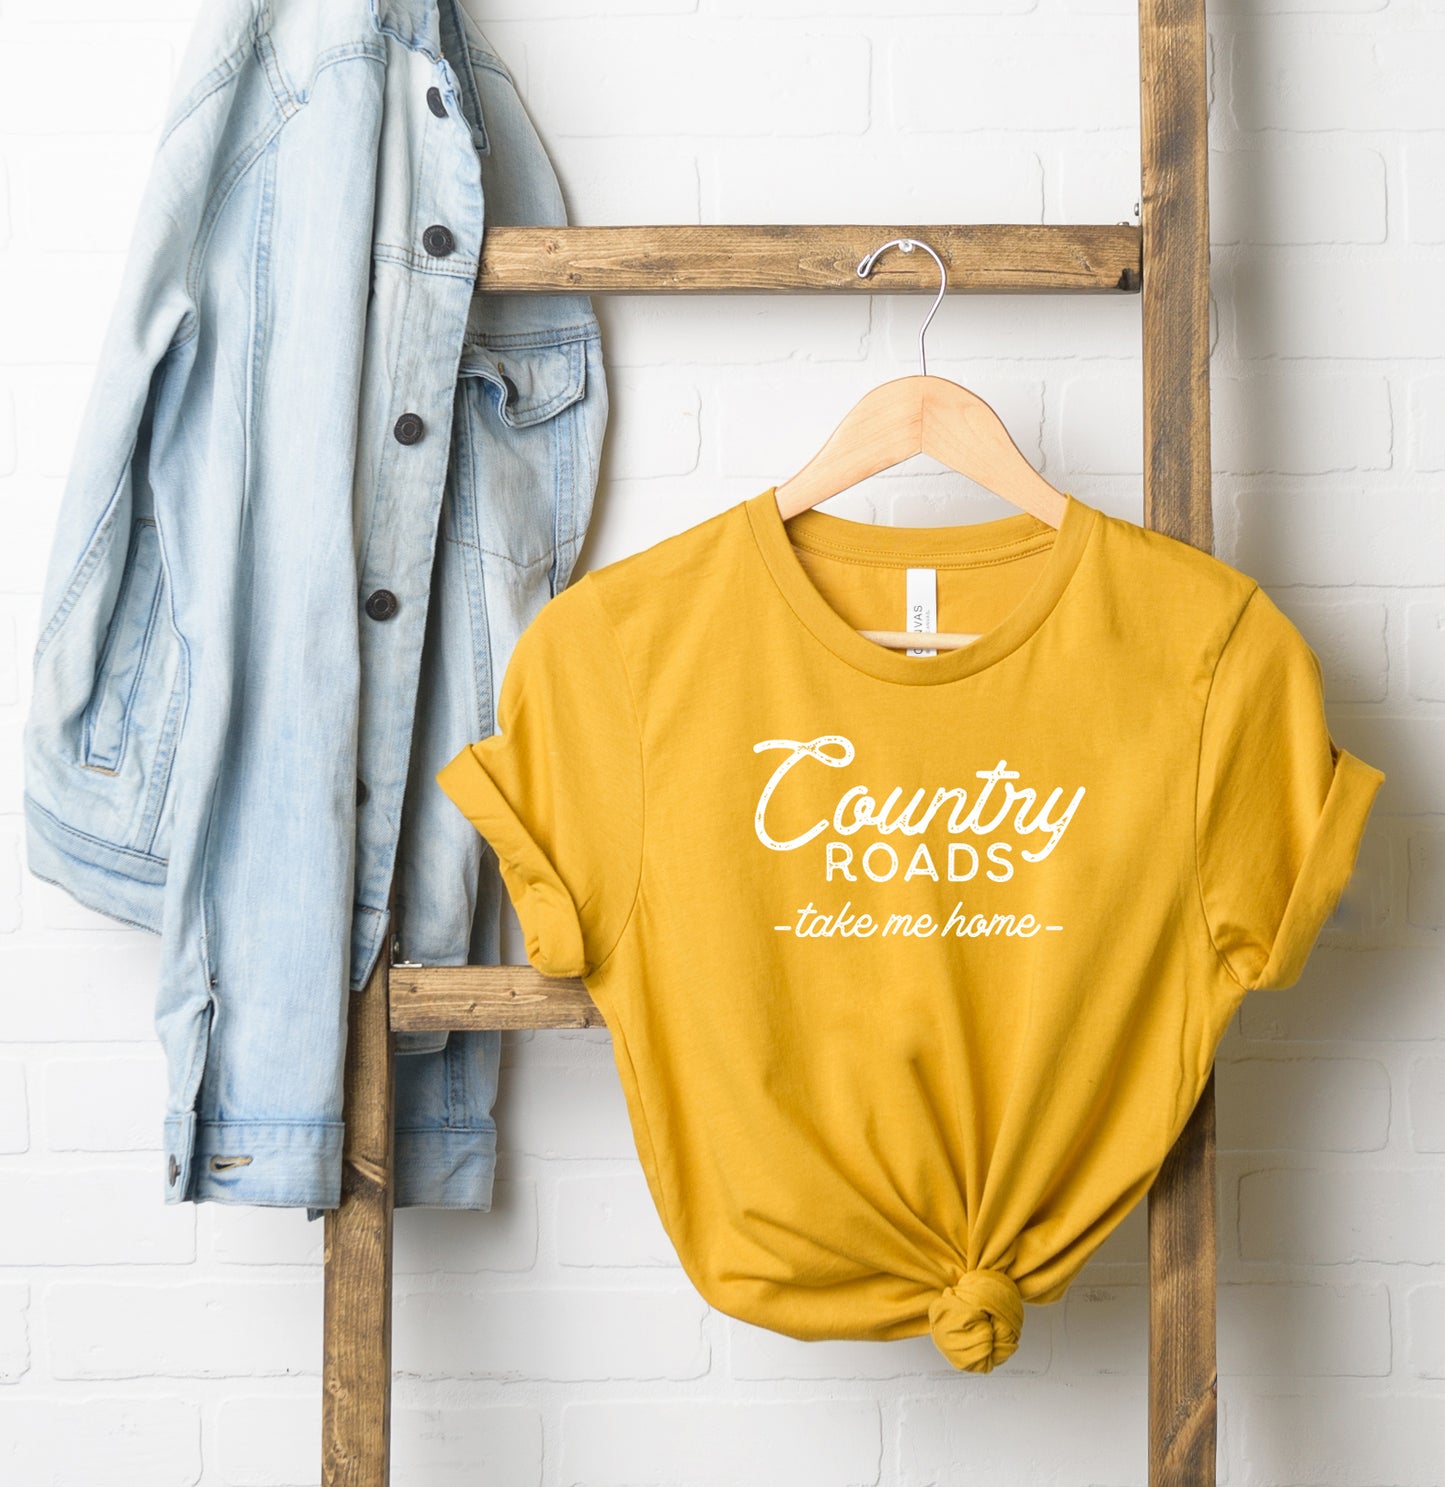 Country Roads Take Me Home | Short Sleeve Graphic Tee